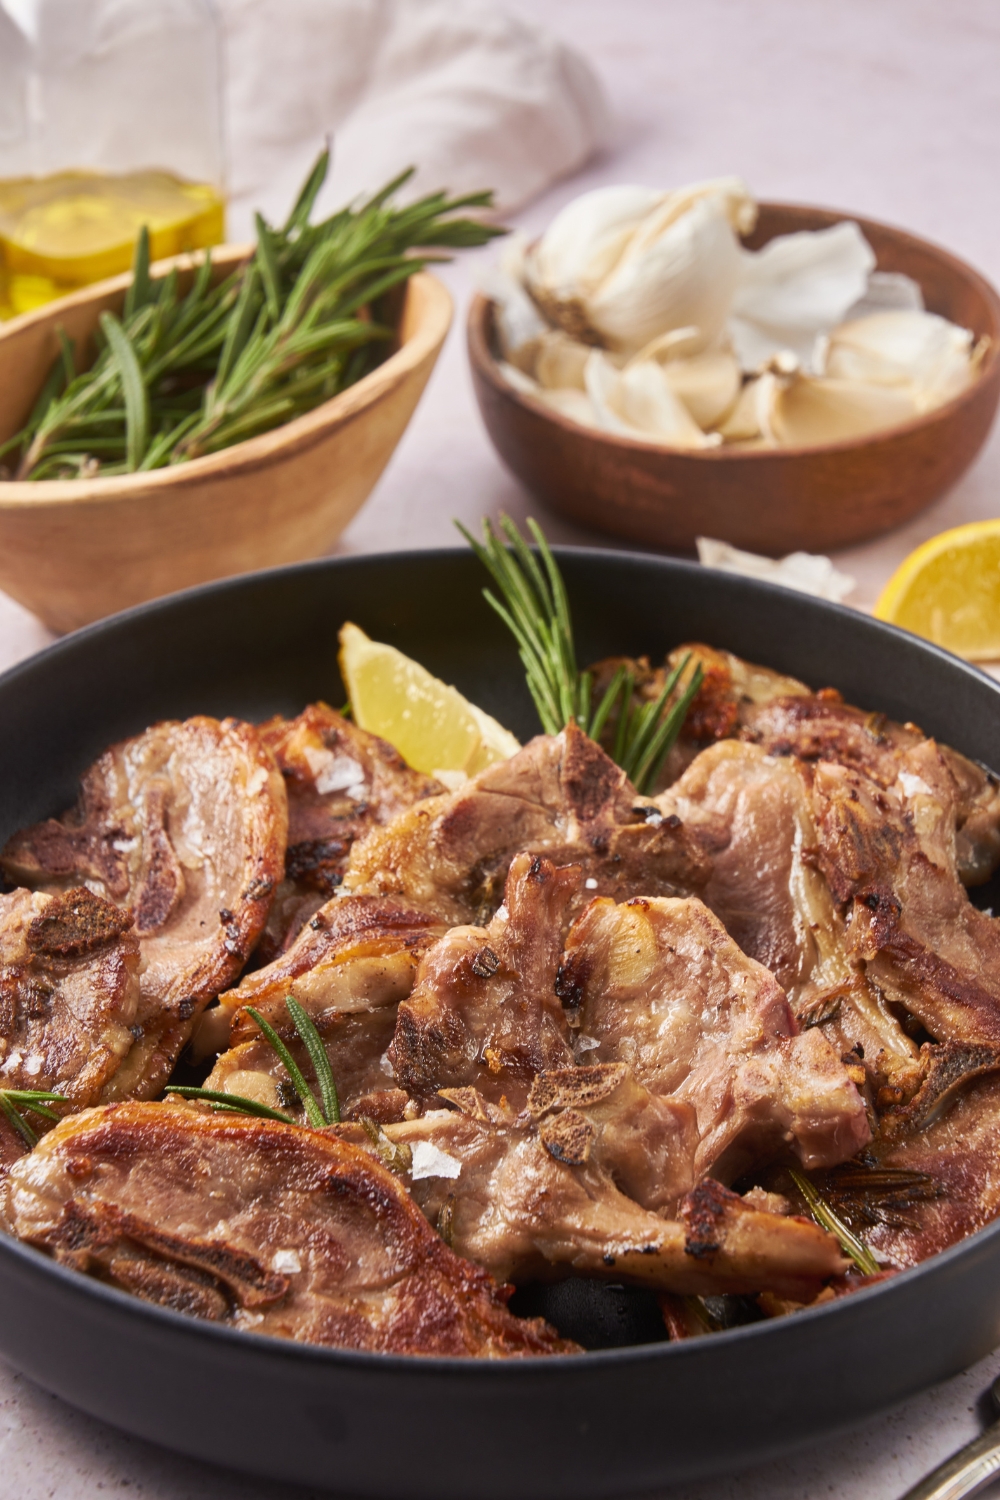 A plate of cooked baby lamb chops piled on top of each other, garnished with sea salt and fresh herbs and a lemon wedge. In the background is a bowl of rosemary and a bowl of garlic.